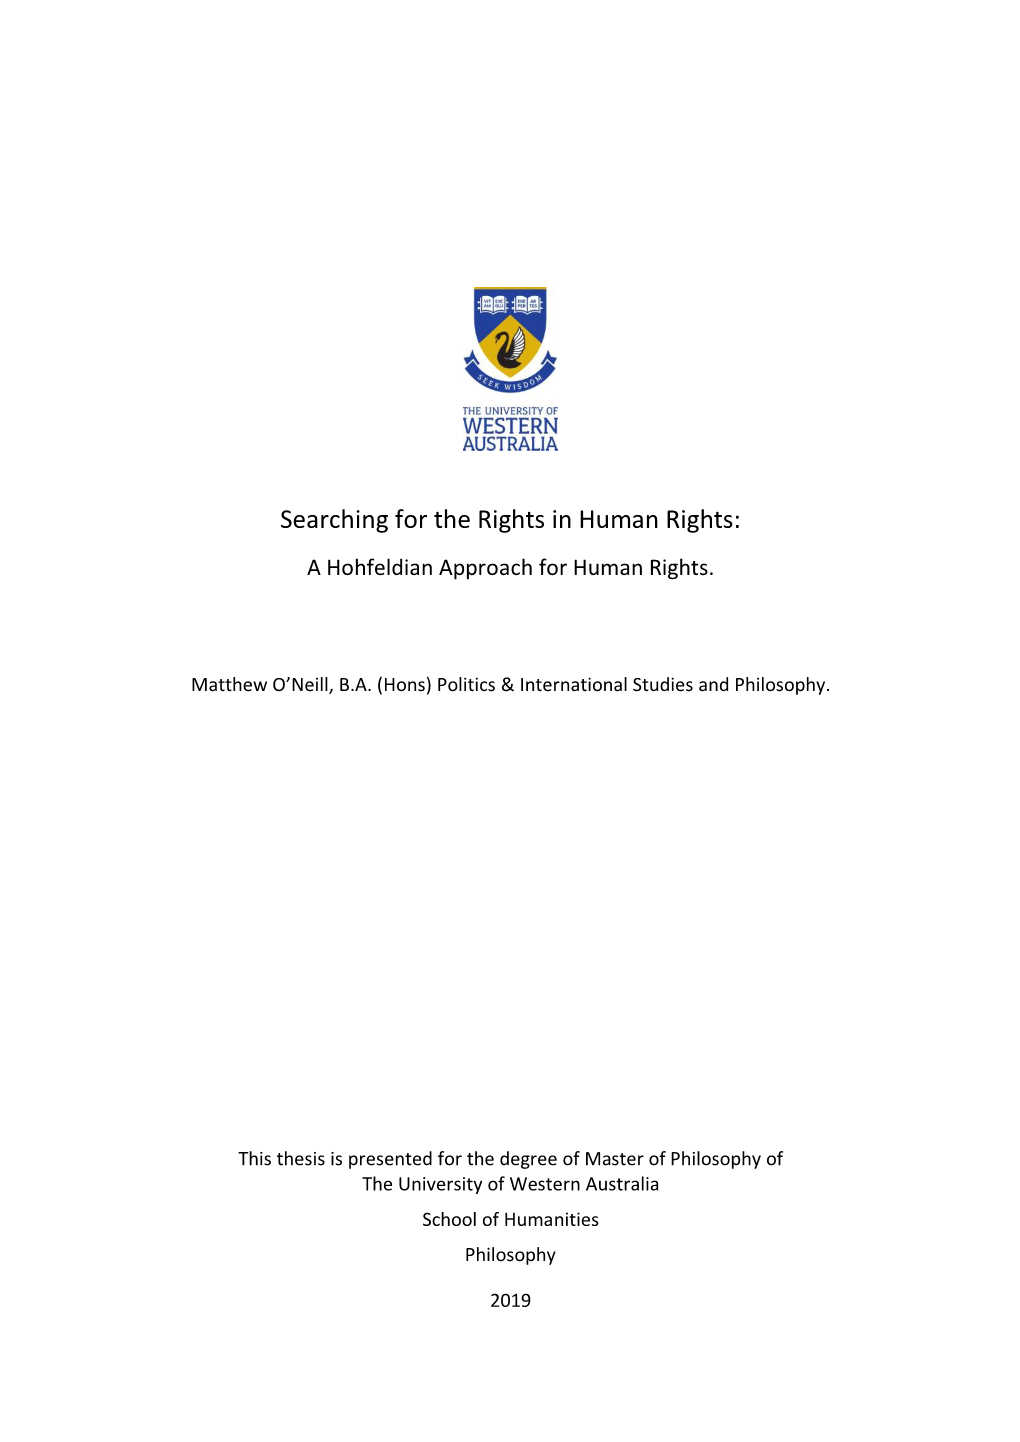 Searching for the Rights in Human Rights: a Hohfeldian Approach for Human Rights